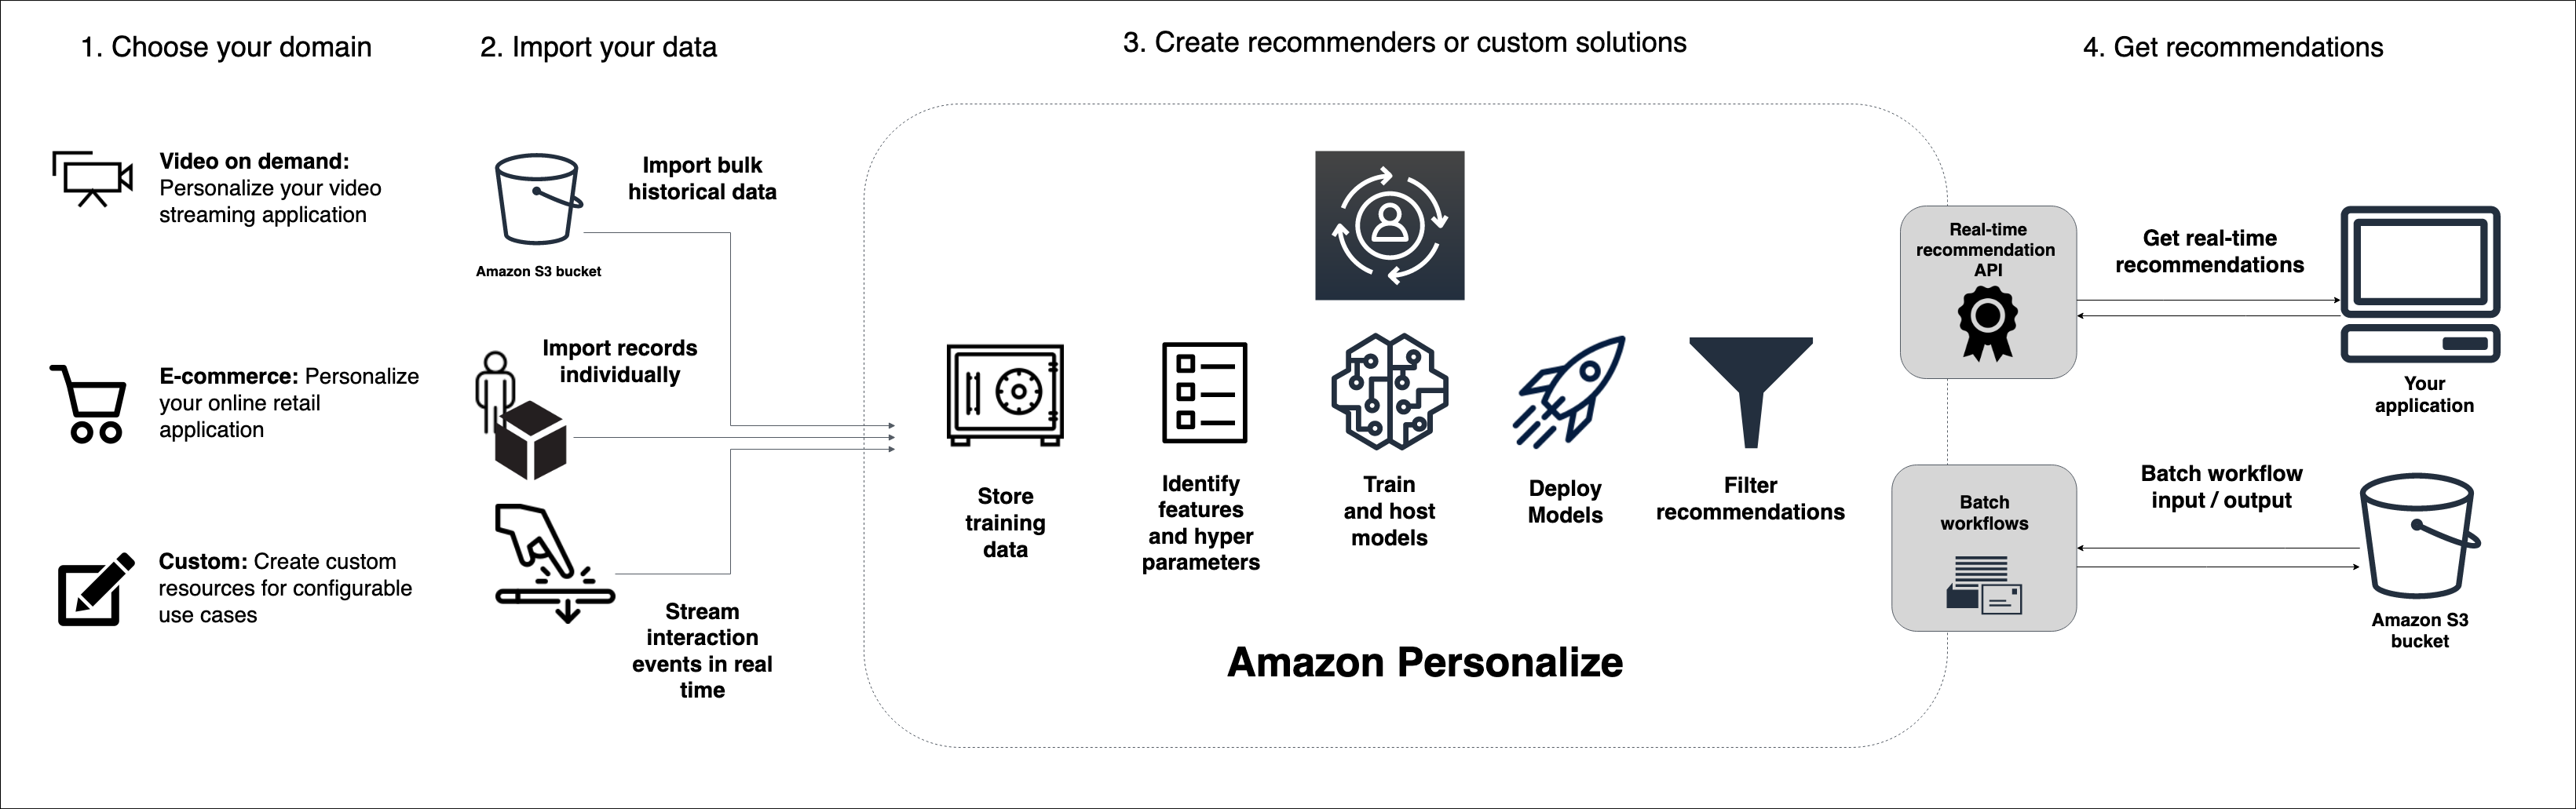 Depicts the Amazon Personalize workflow, from importing data, to training a model, to getting recommendations.